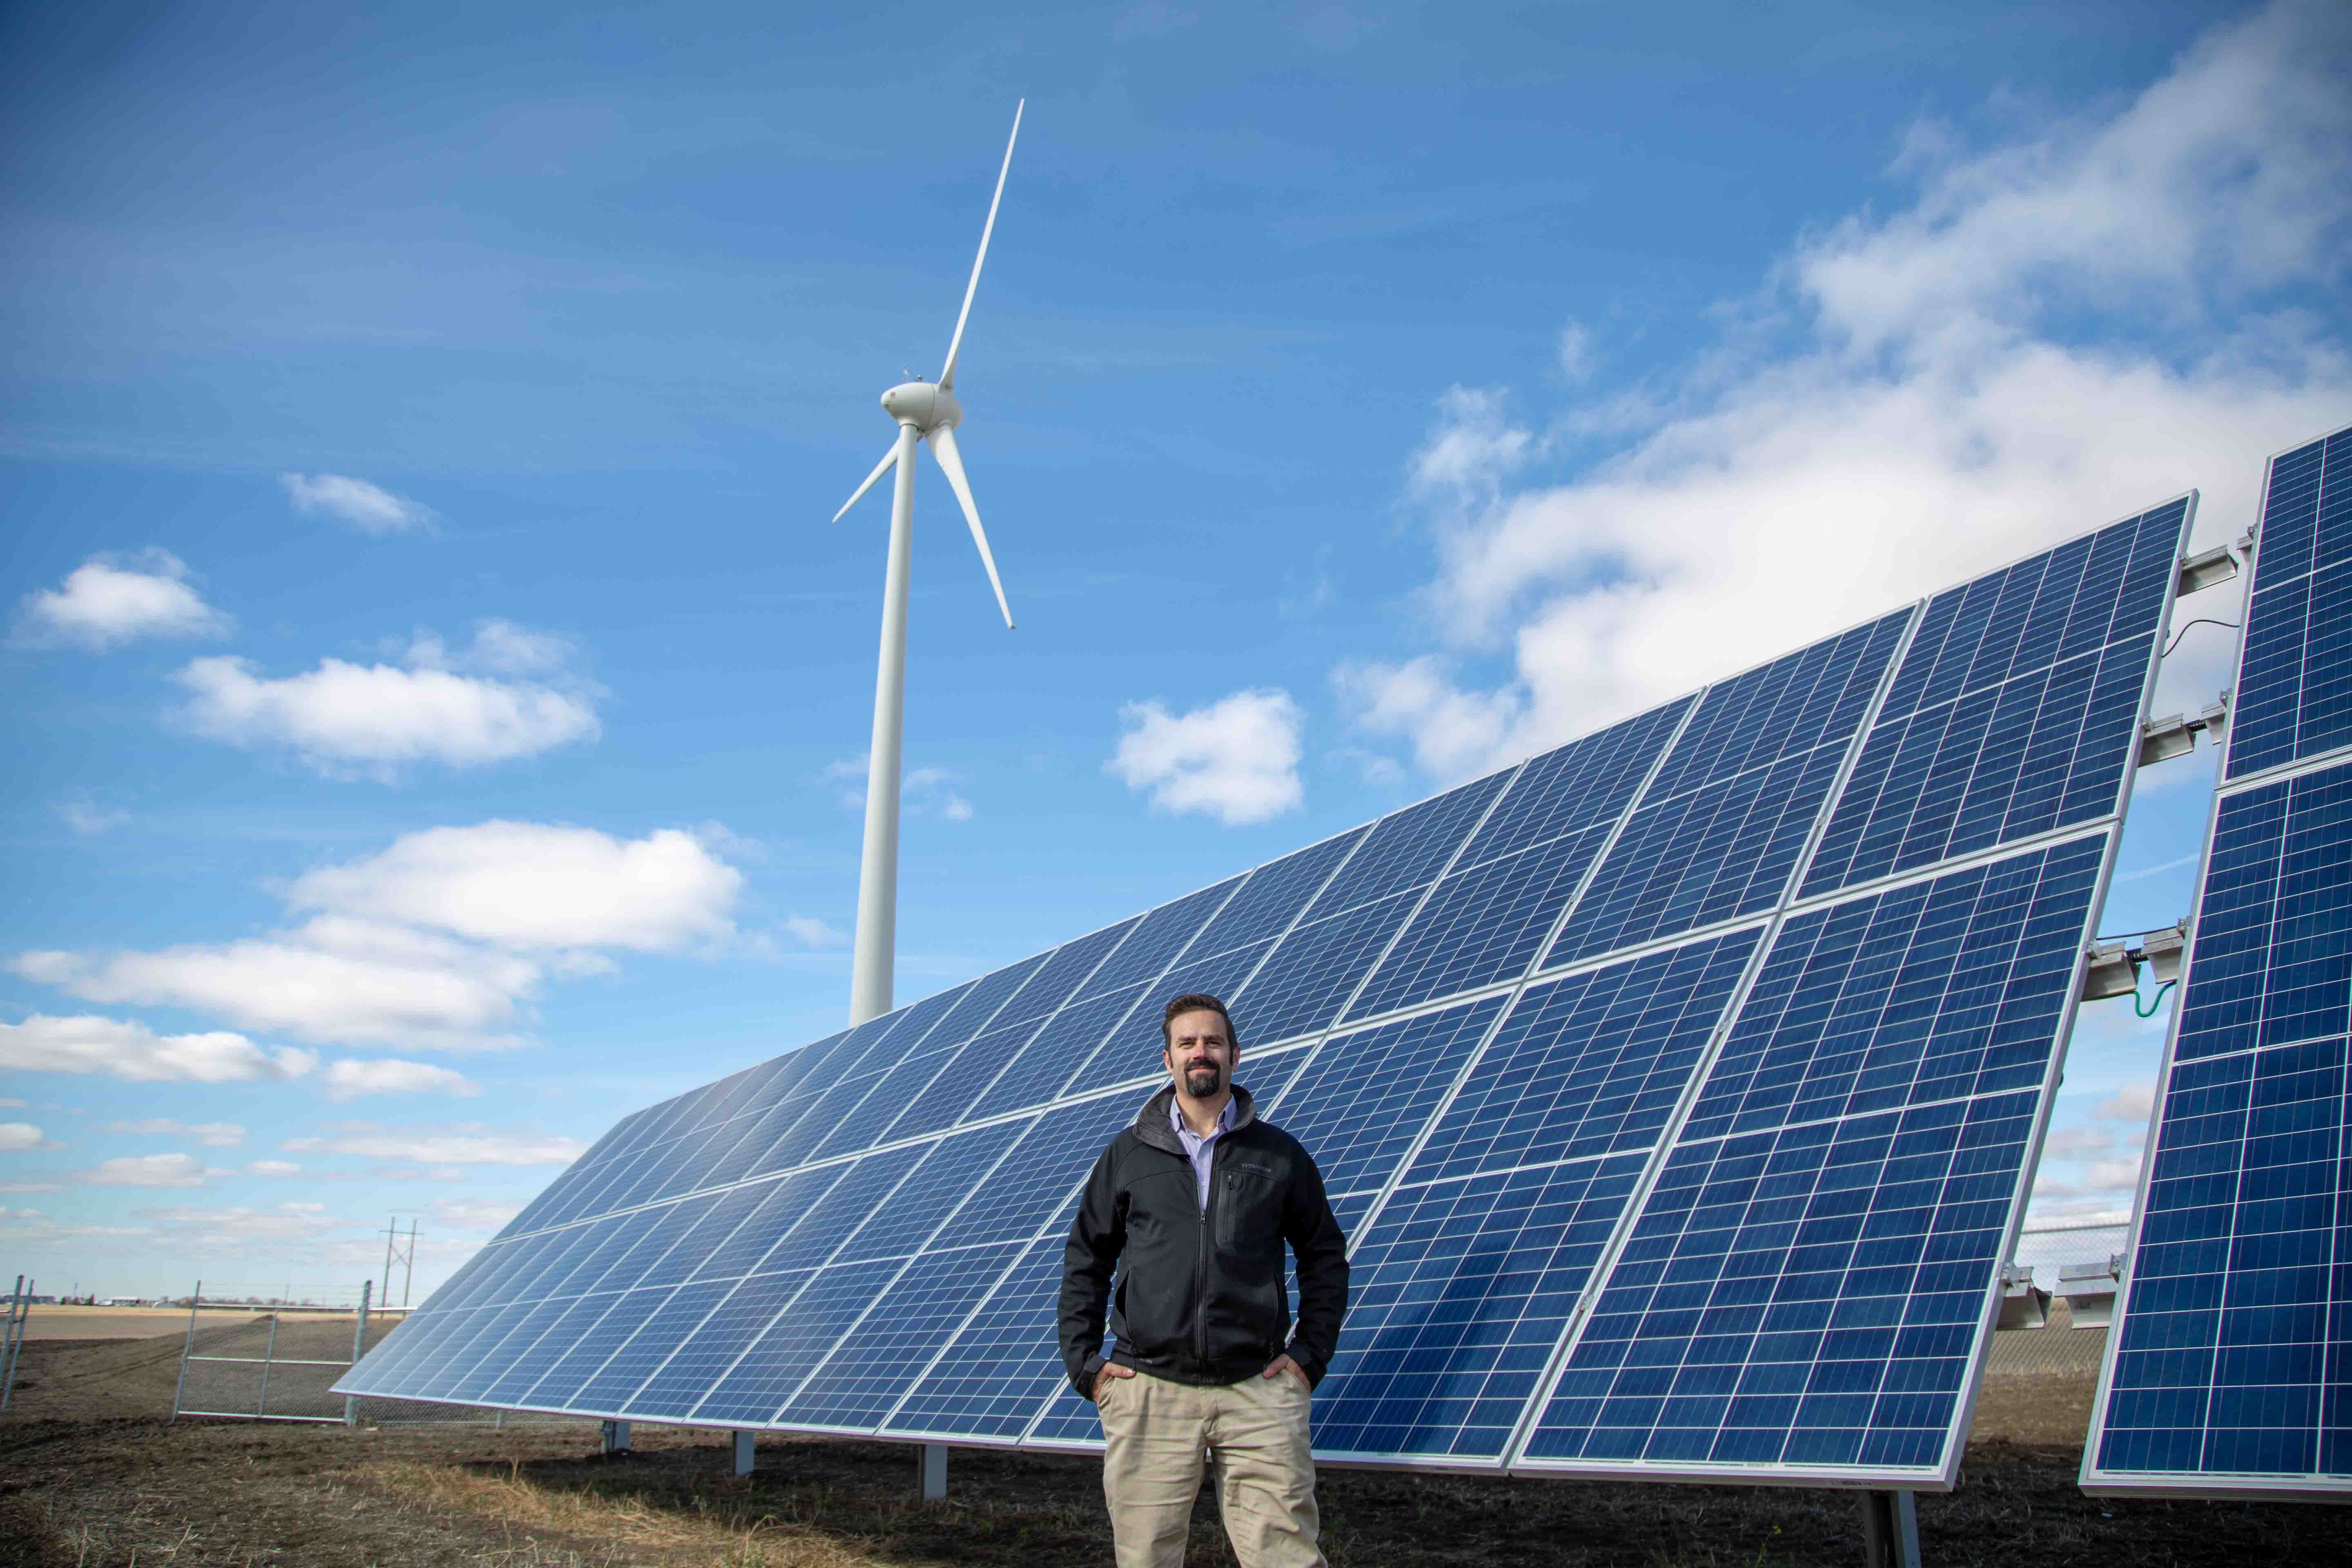 src employee standing in front of wind turbine and solar panels